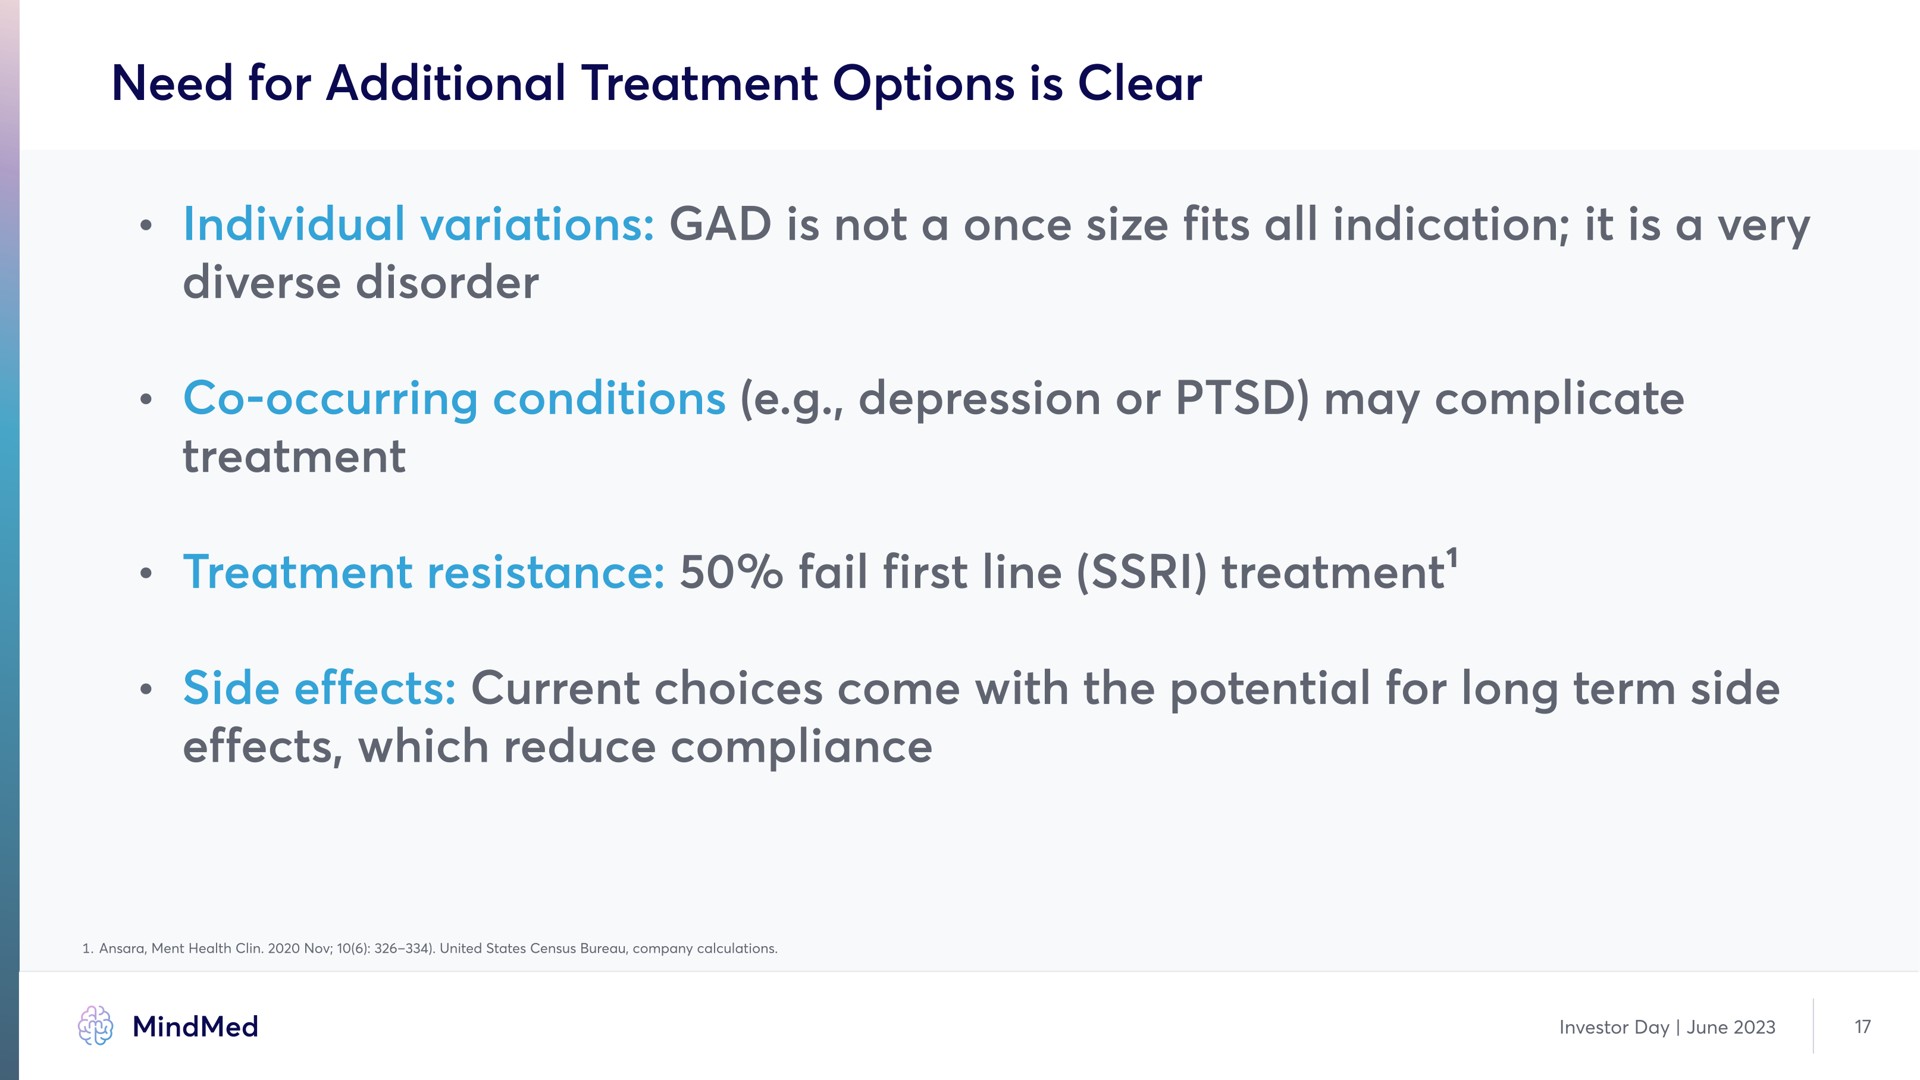 need for additional treatment options is clear individual variations diverse gad is not a once size fits all indication it is a very occurring conditions depression or may complicate treatment resistance fail first line treatment side effects effects which reduce compliance current choices come with the potential for long term side disorder | MindMed